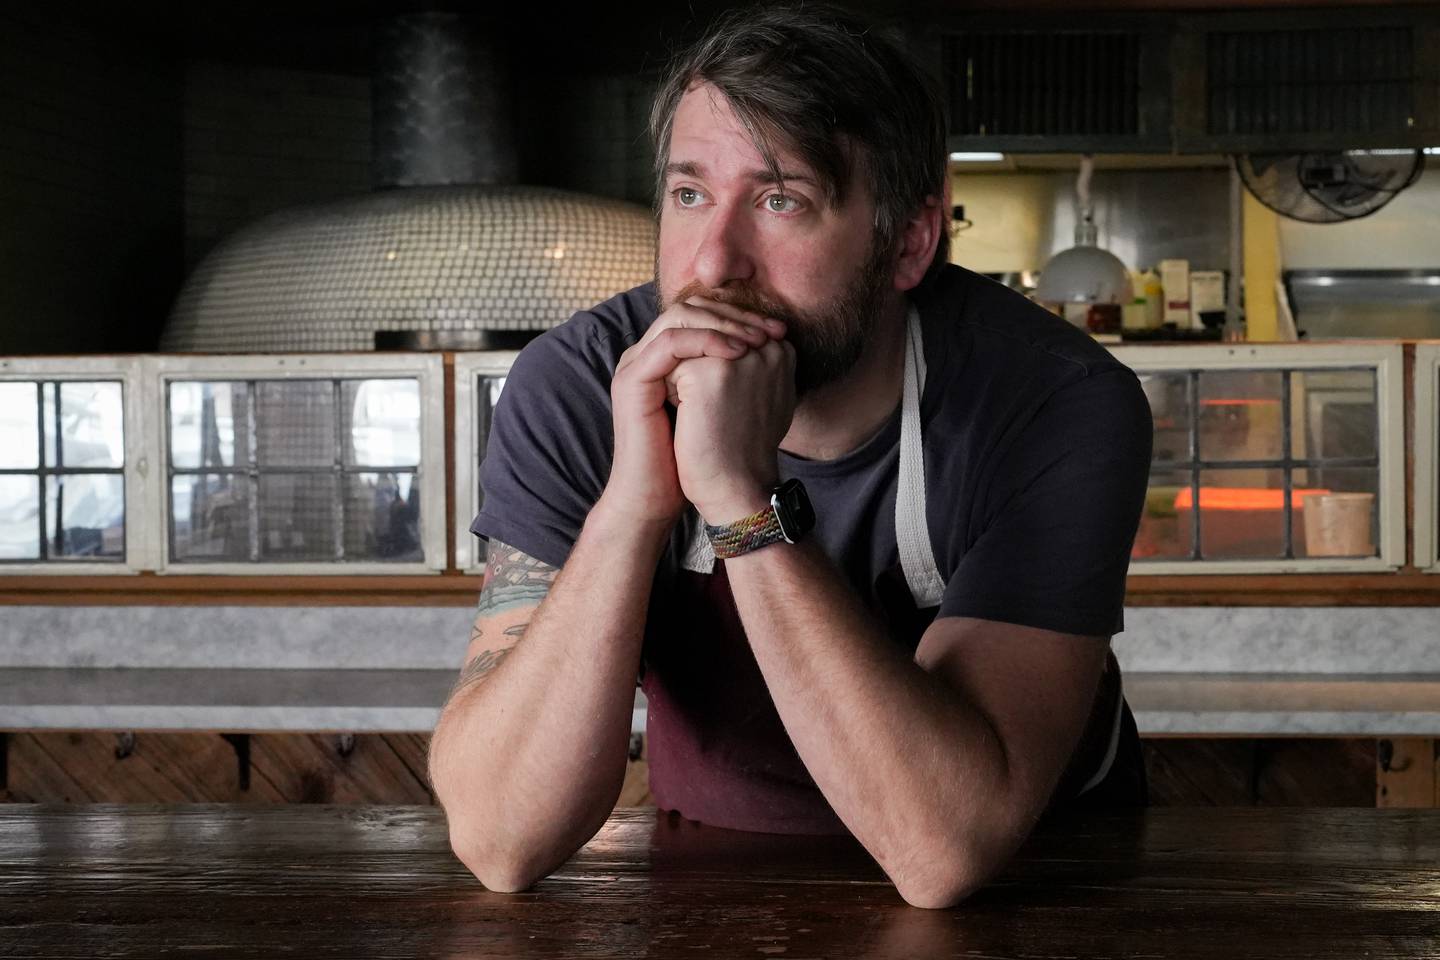 Ricky Johnson, owner and chef at Forno Restaurant and Wine Bar, stands for a portrait inside his restaurant on Monday, March 21. Johnson is one of several property and business owners who say they have concerns about the low levels of foot traffic in the district, which they need to stay in business.